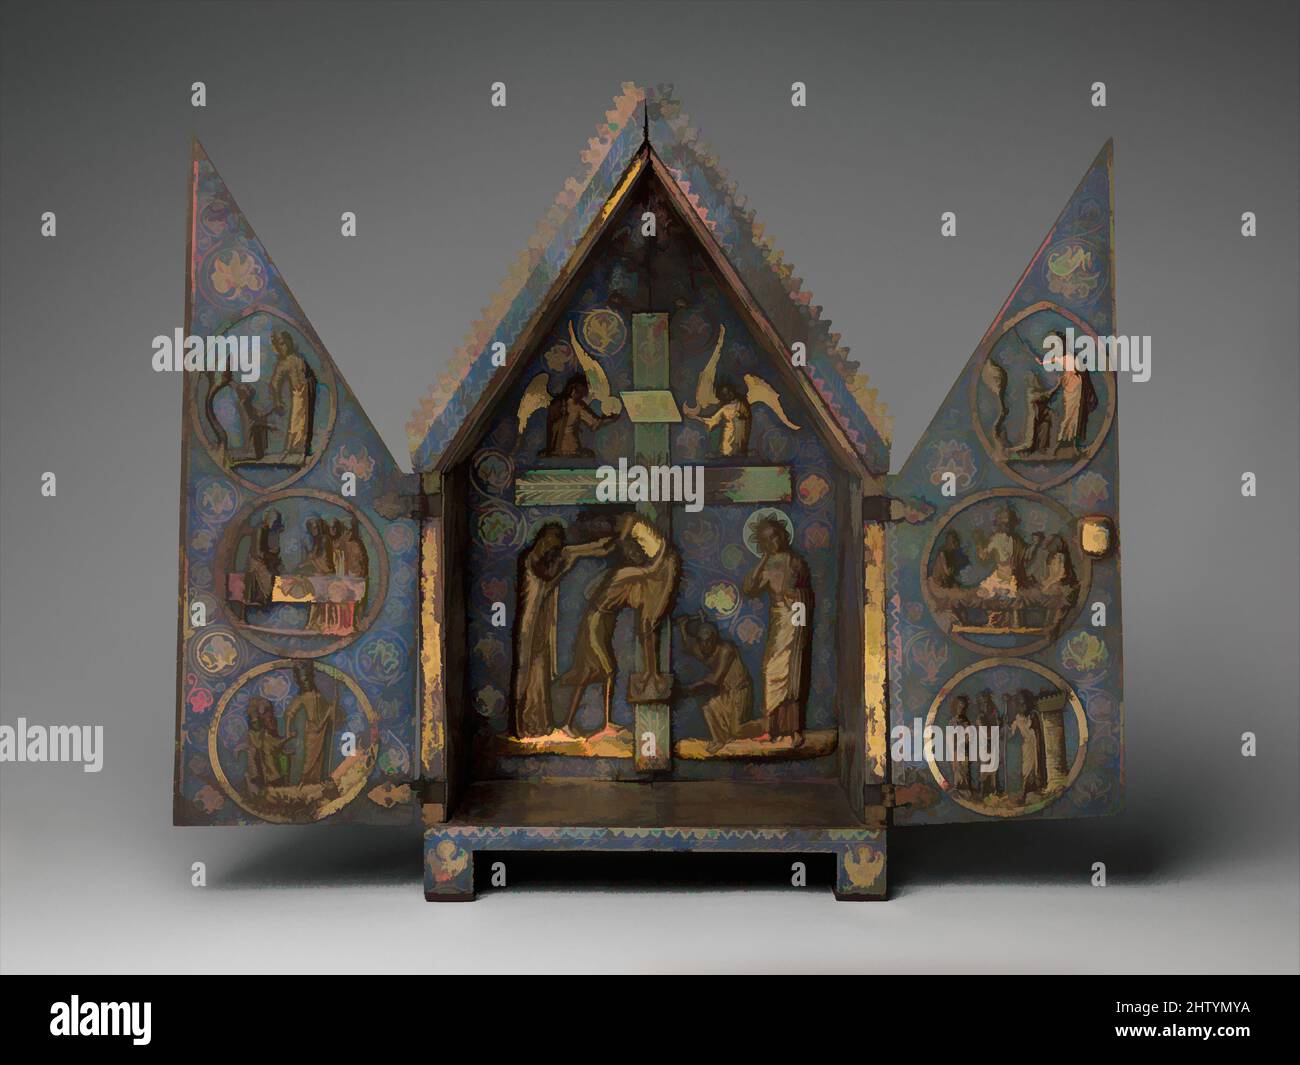 Art inspired by Tabernacle of Cherves, ca. 1220–1230, Made in Limoges, France, French, Copper (plaques): engraved, scraped, stippled, and gilt; (appliqués): repoussé, chased, engraved, scraped, and gilt; champlevé enamel: medium blue, turquoise, medium green, yellow, red, and white, Classic works modernized by Artotop with a splash of modernity. Shapes, color and value, eye-catching visual impact on art. Emotions through freedom of artworks in a contemporary way. A timeless message pursuing a wildly creative new direction. Artists turning to the digital medium and creating the Artotop NFT Stock Photo